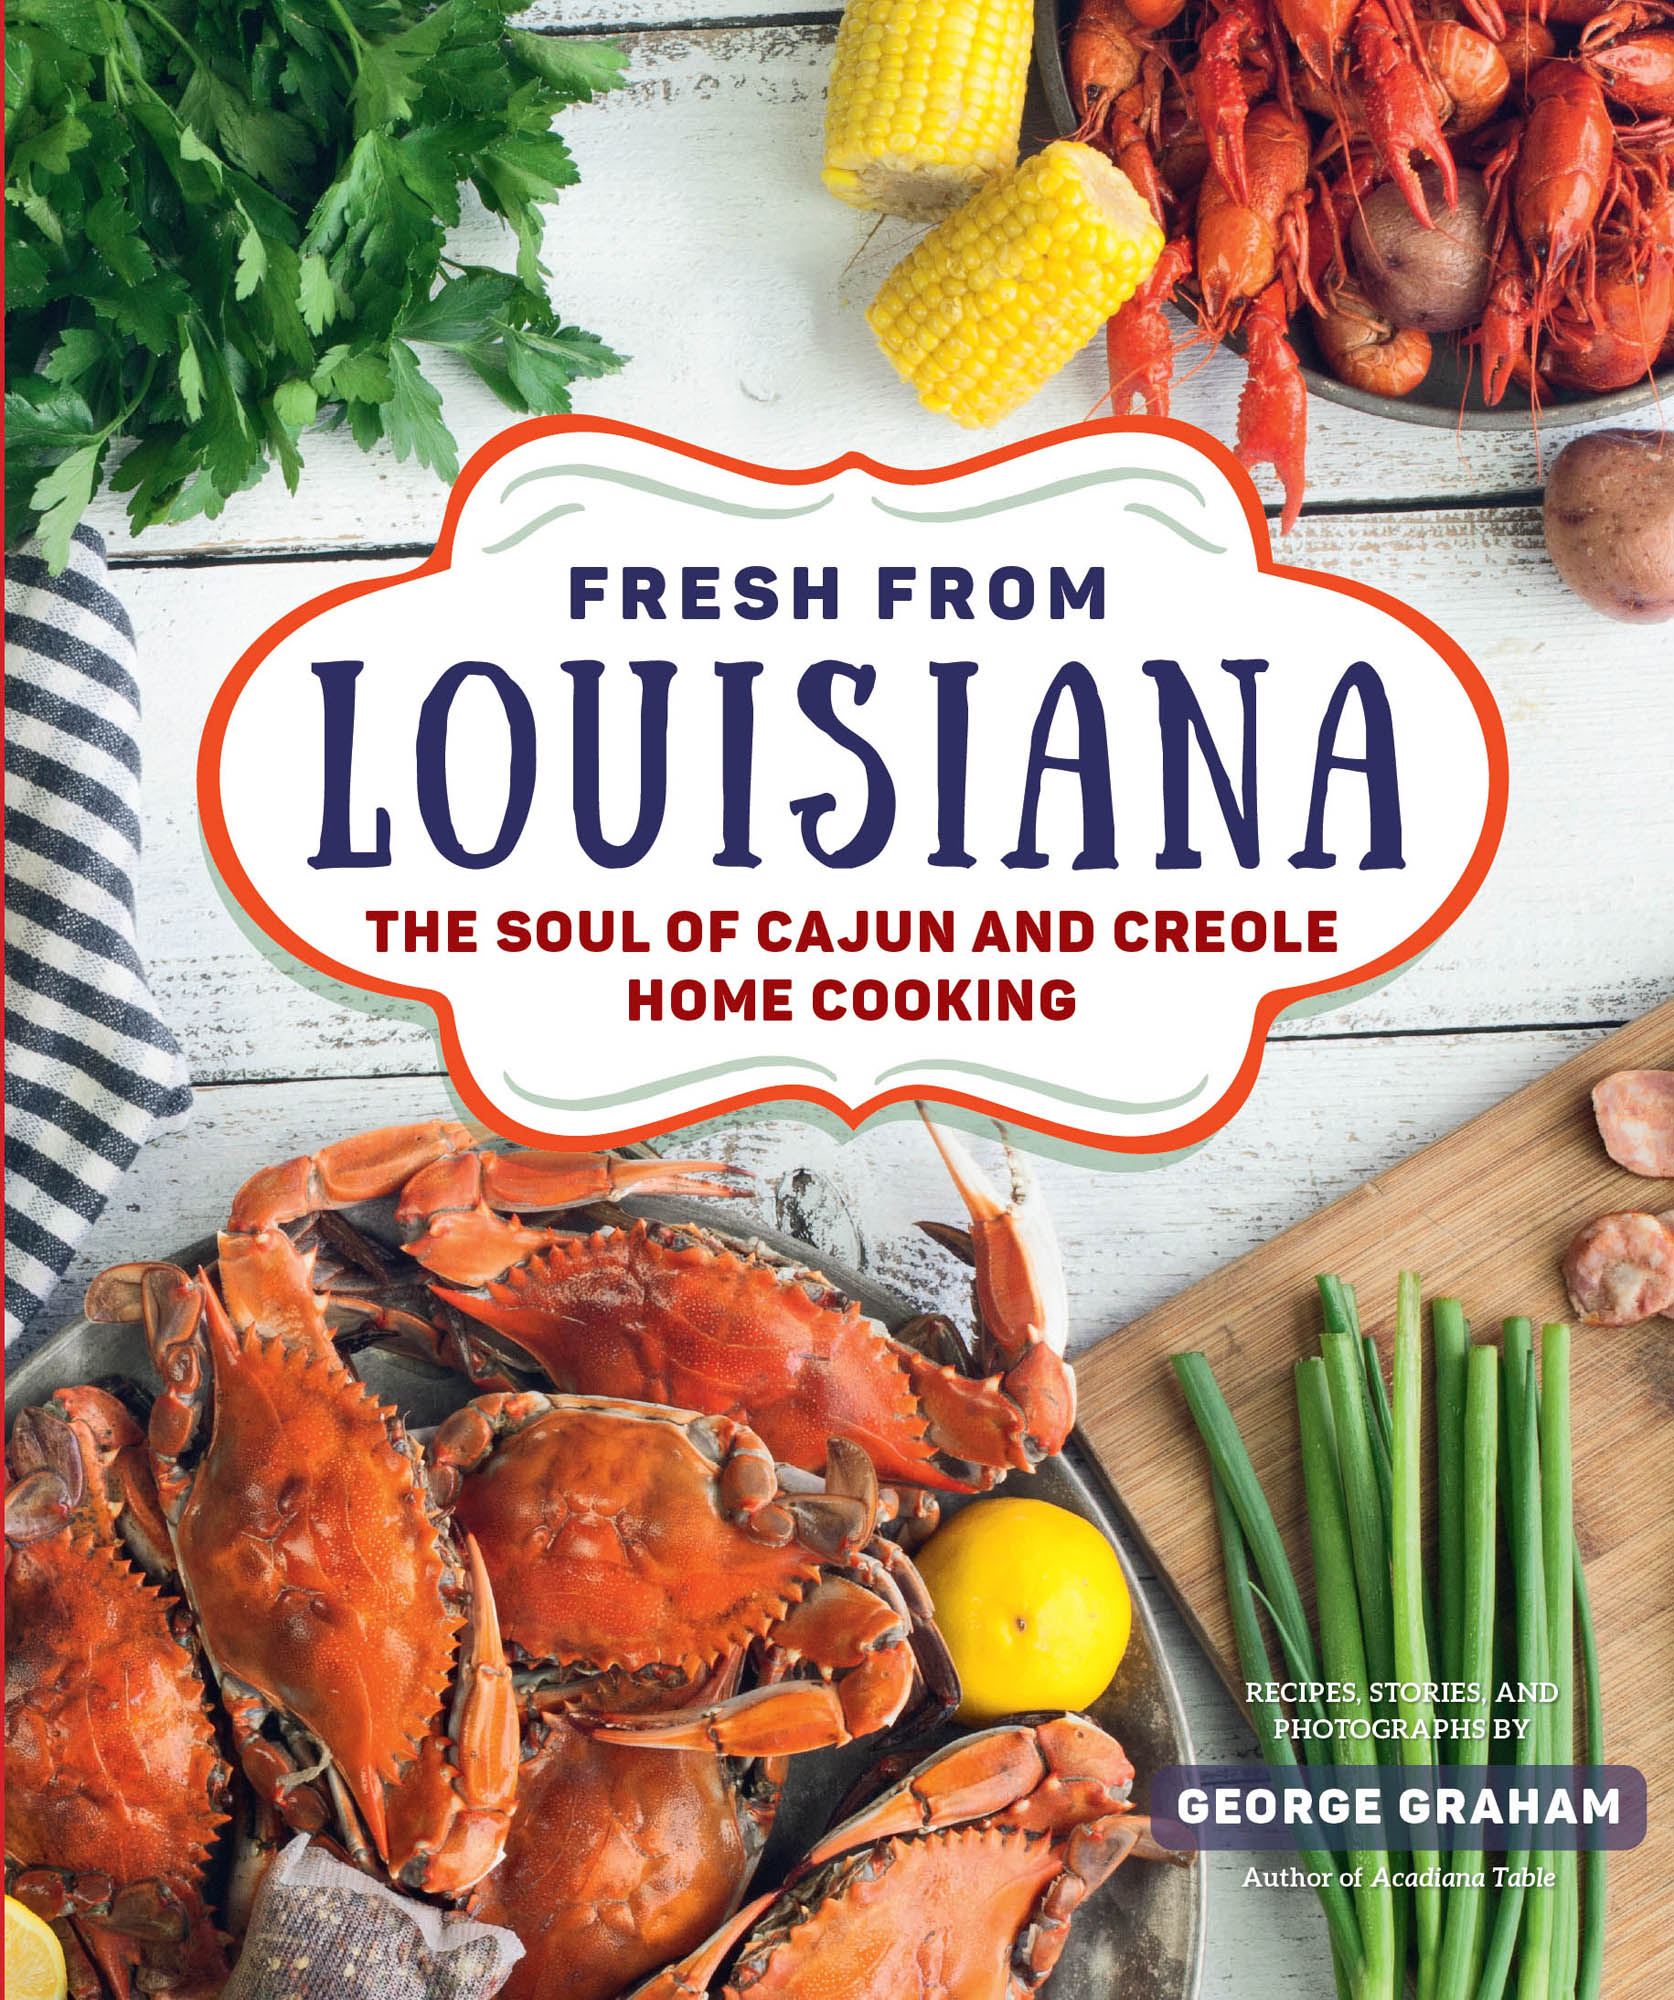 FRESH FROM Louisiana THE SOUL OF CAJUN AND CREOLE HOME COOKING - photo 1